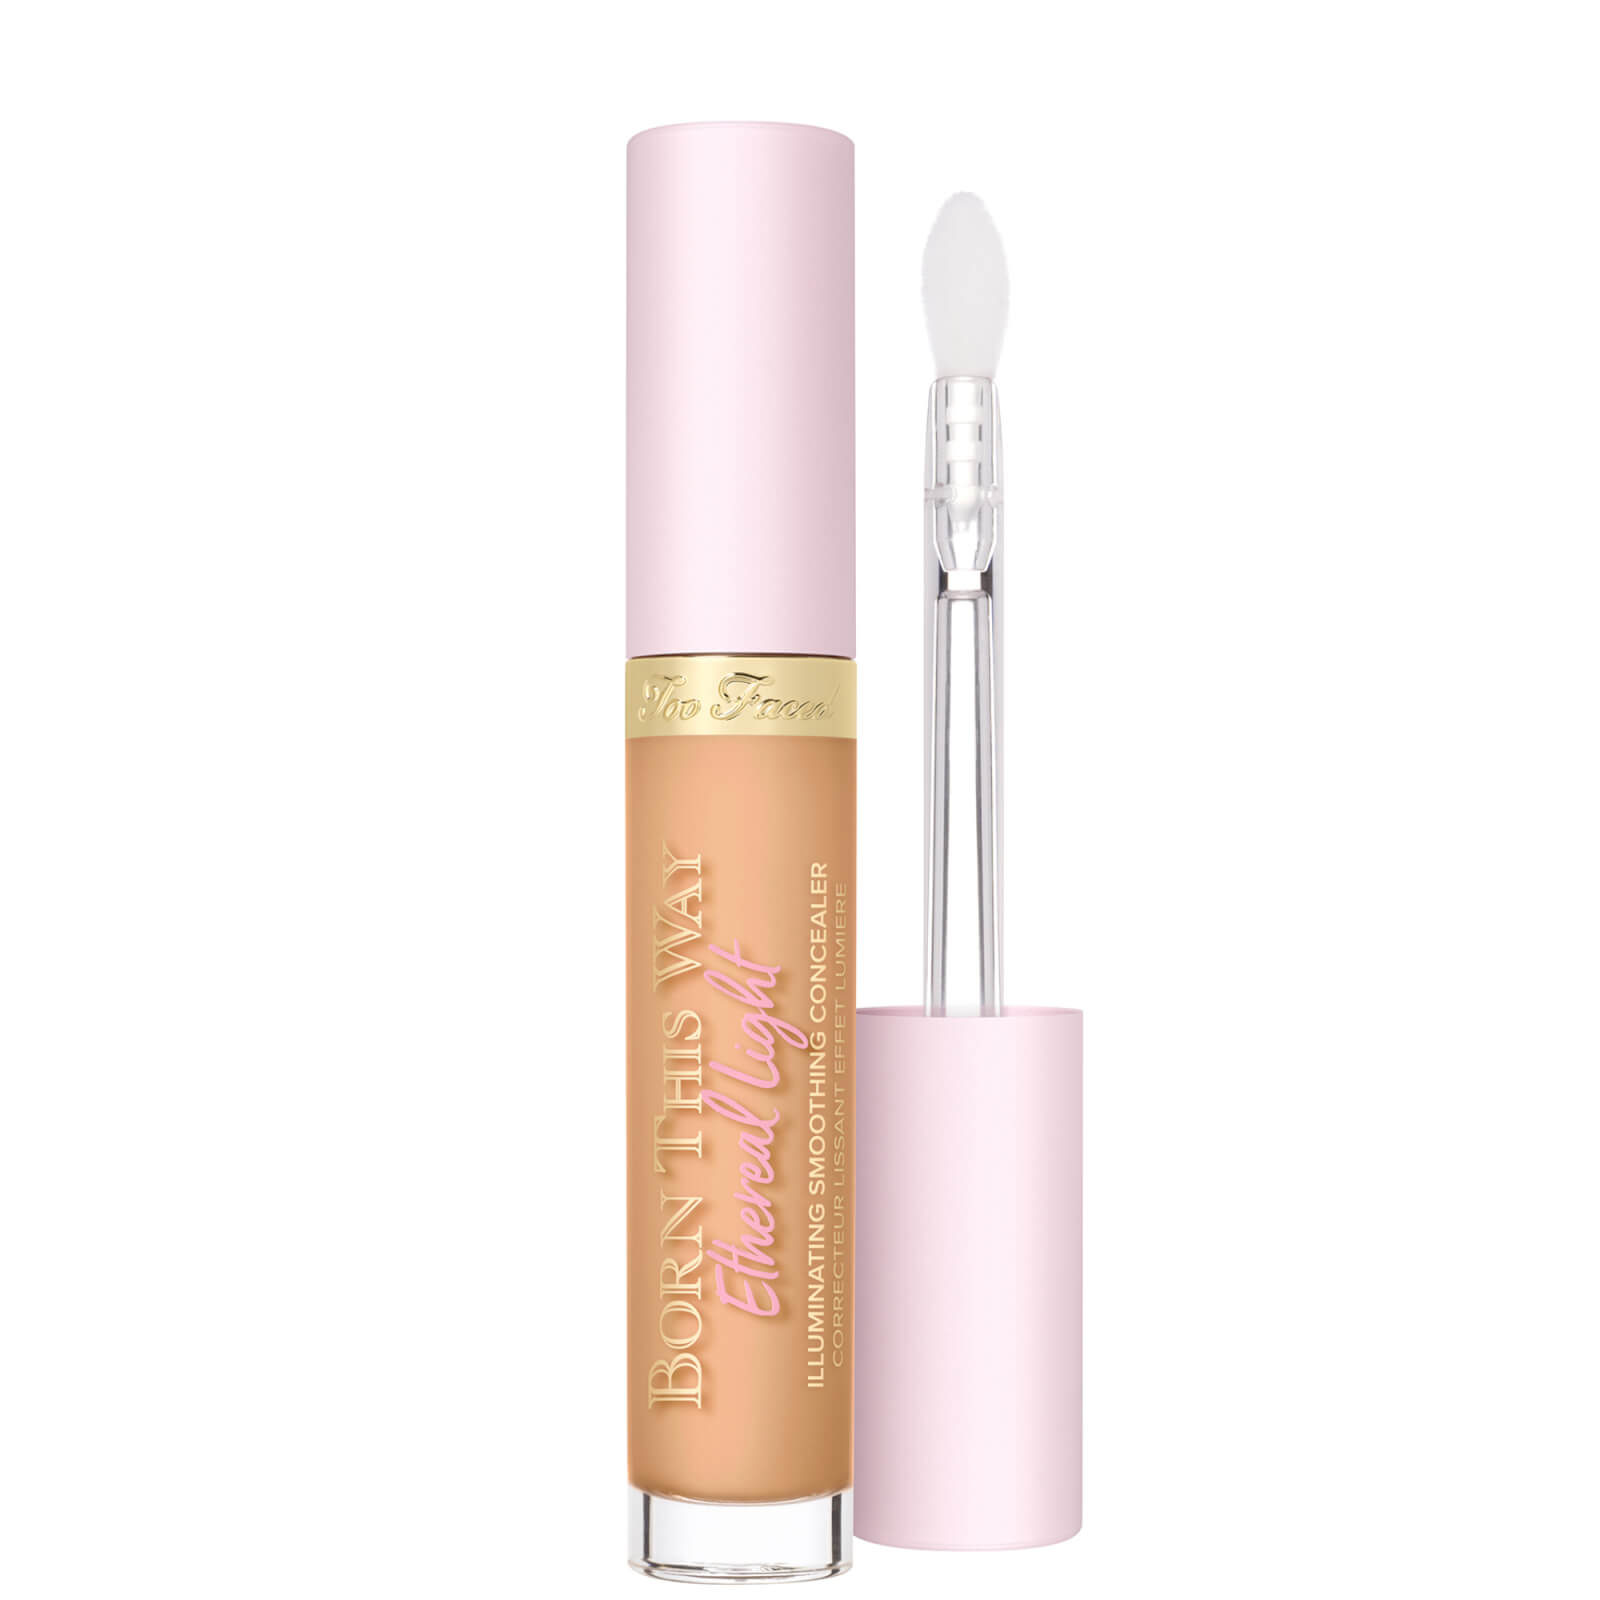 Too Faced Born This Way Ethereal Light Illuminating Smoothing Concealer 15ml (Various Shades) - Cafe